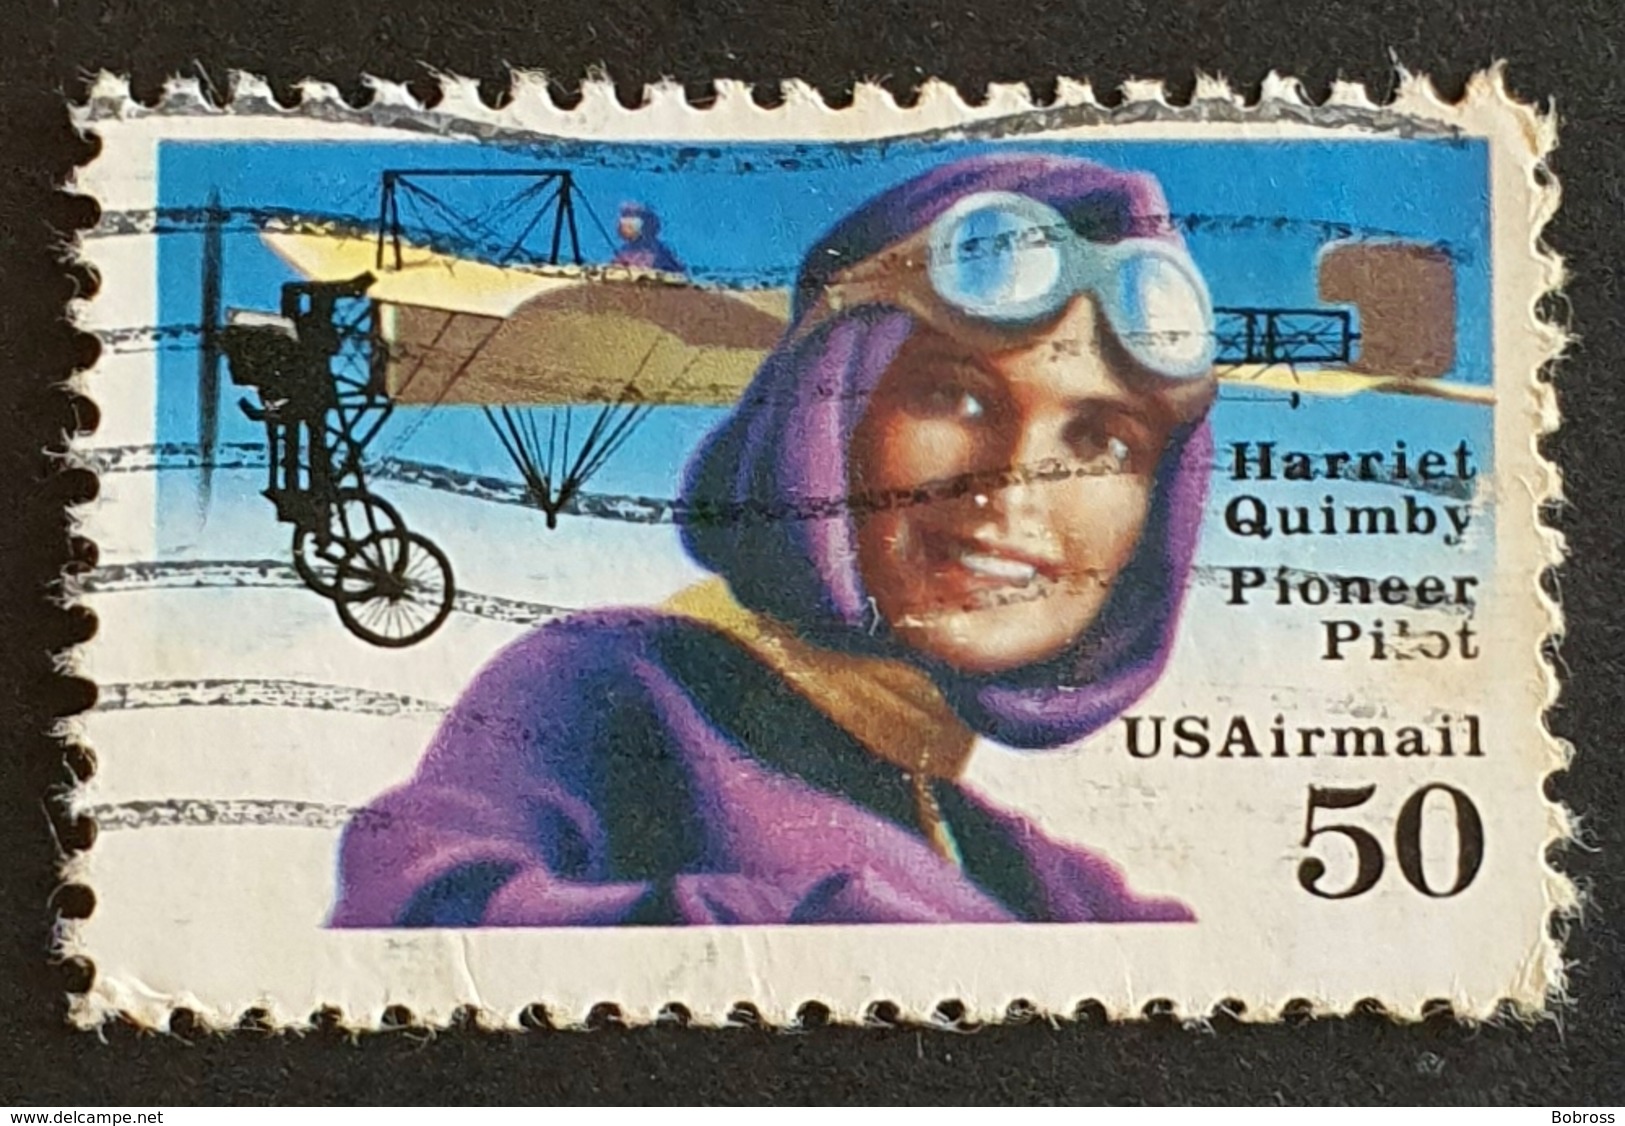 Airmail, #C128, Harriet Quimby , United States Of America, USA, Used - 2b. 1941-1960 Unused